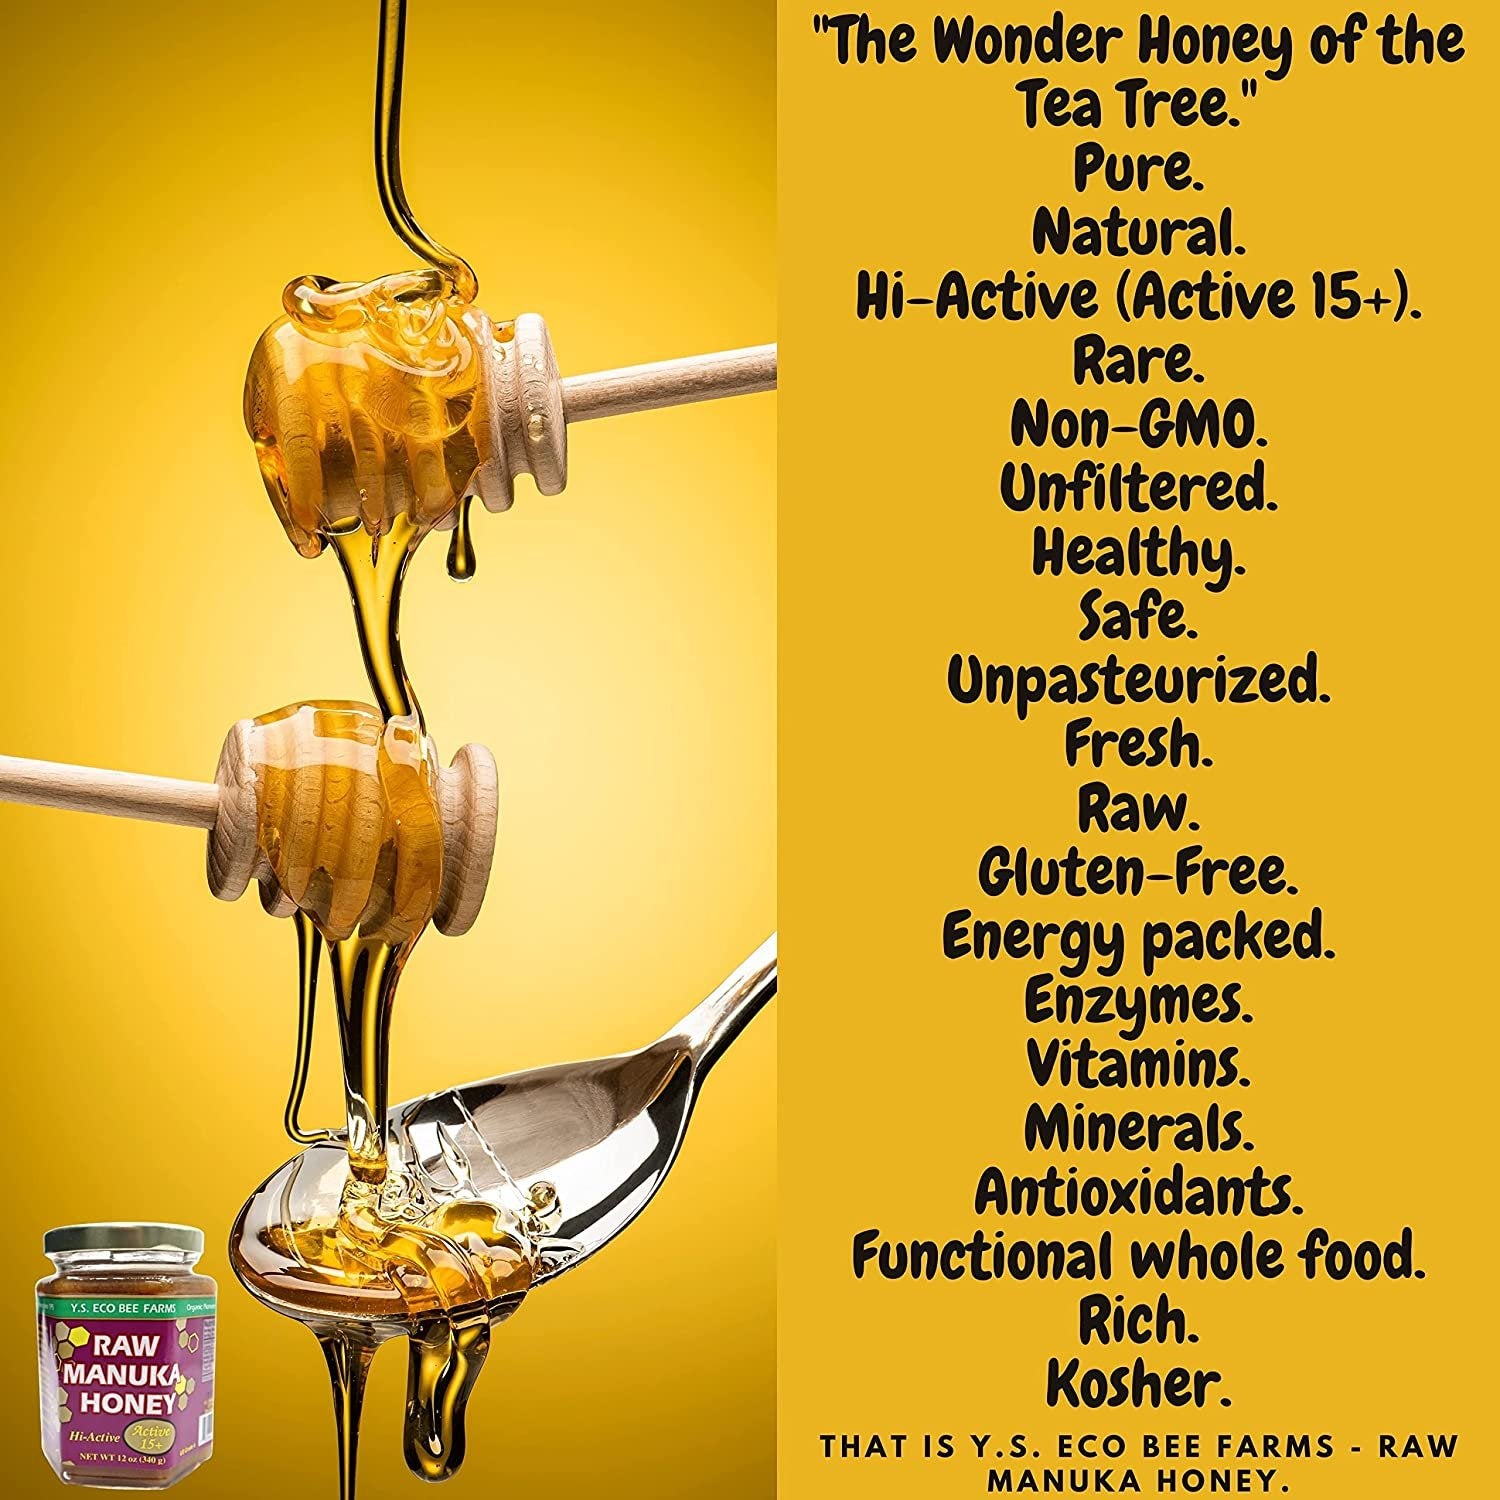 Y.S. Eco Bee Farms, 100% Certified Raw Manuka Honey, Hi-Active, Active 15plus, Unpasteurized, Unfiltered, Rare, Exotic, Raw, Kosher, Gluten Free, "The Wonder Honey Of The Tea Tree", 12 Oz - 4 Jars